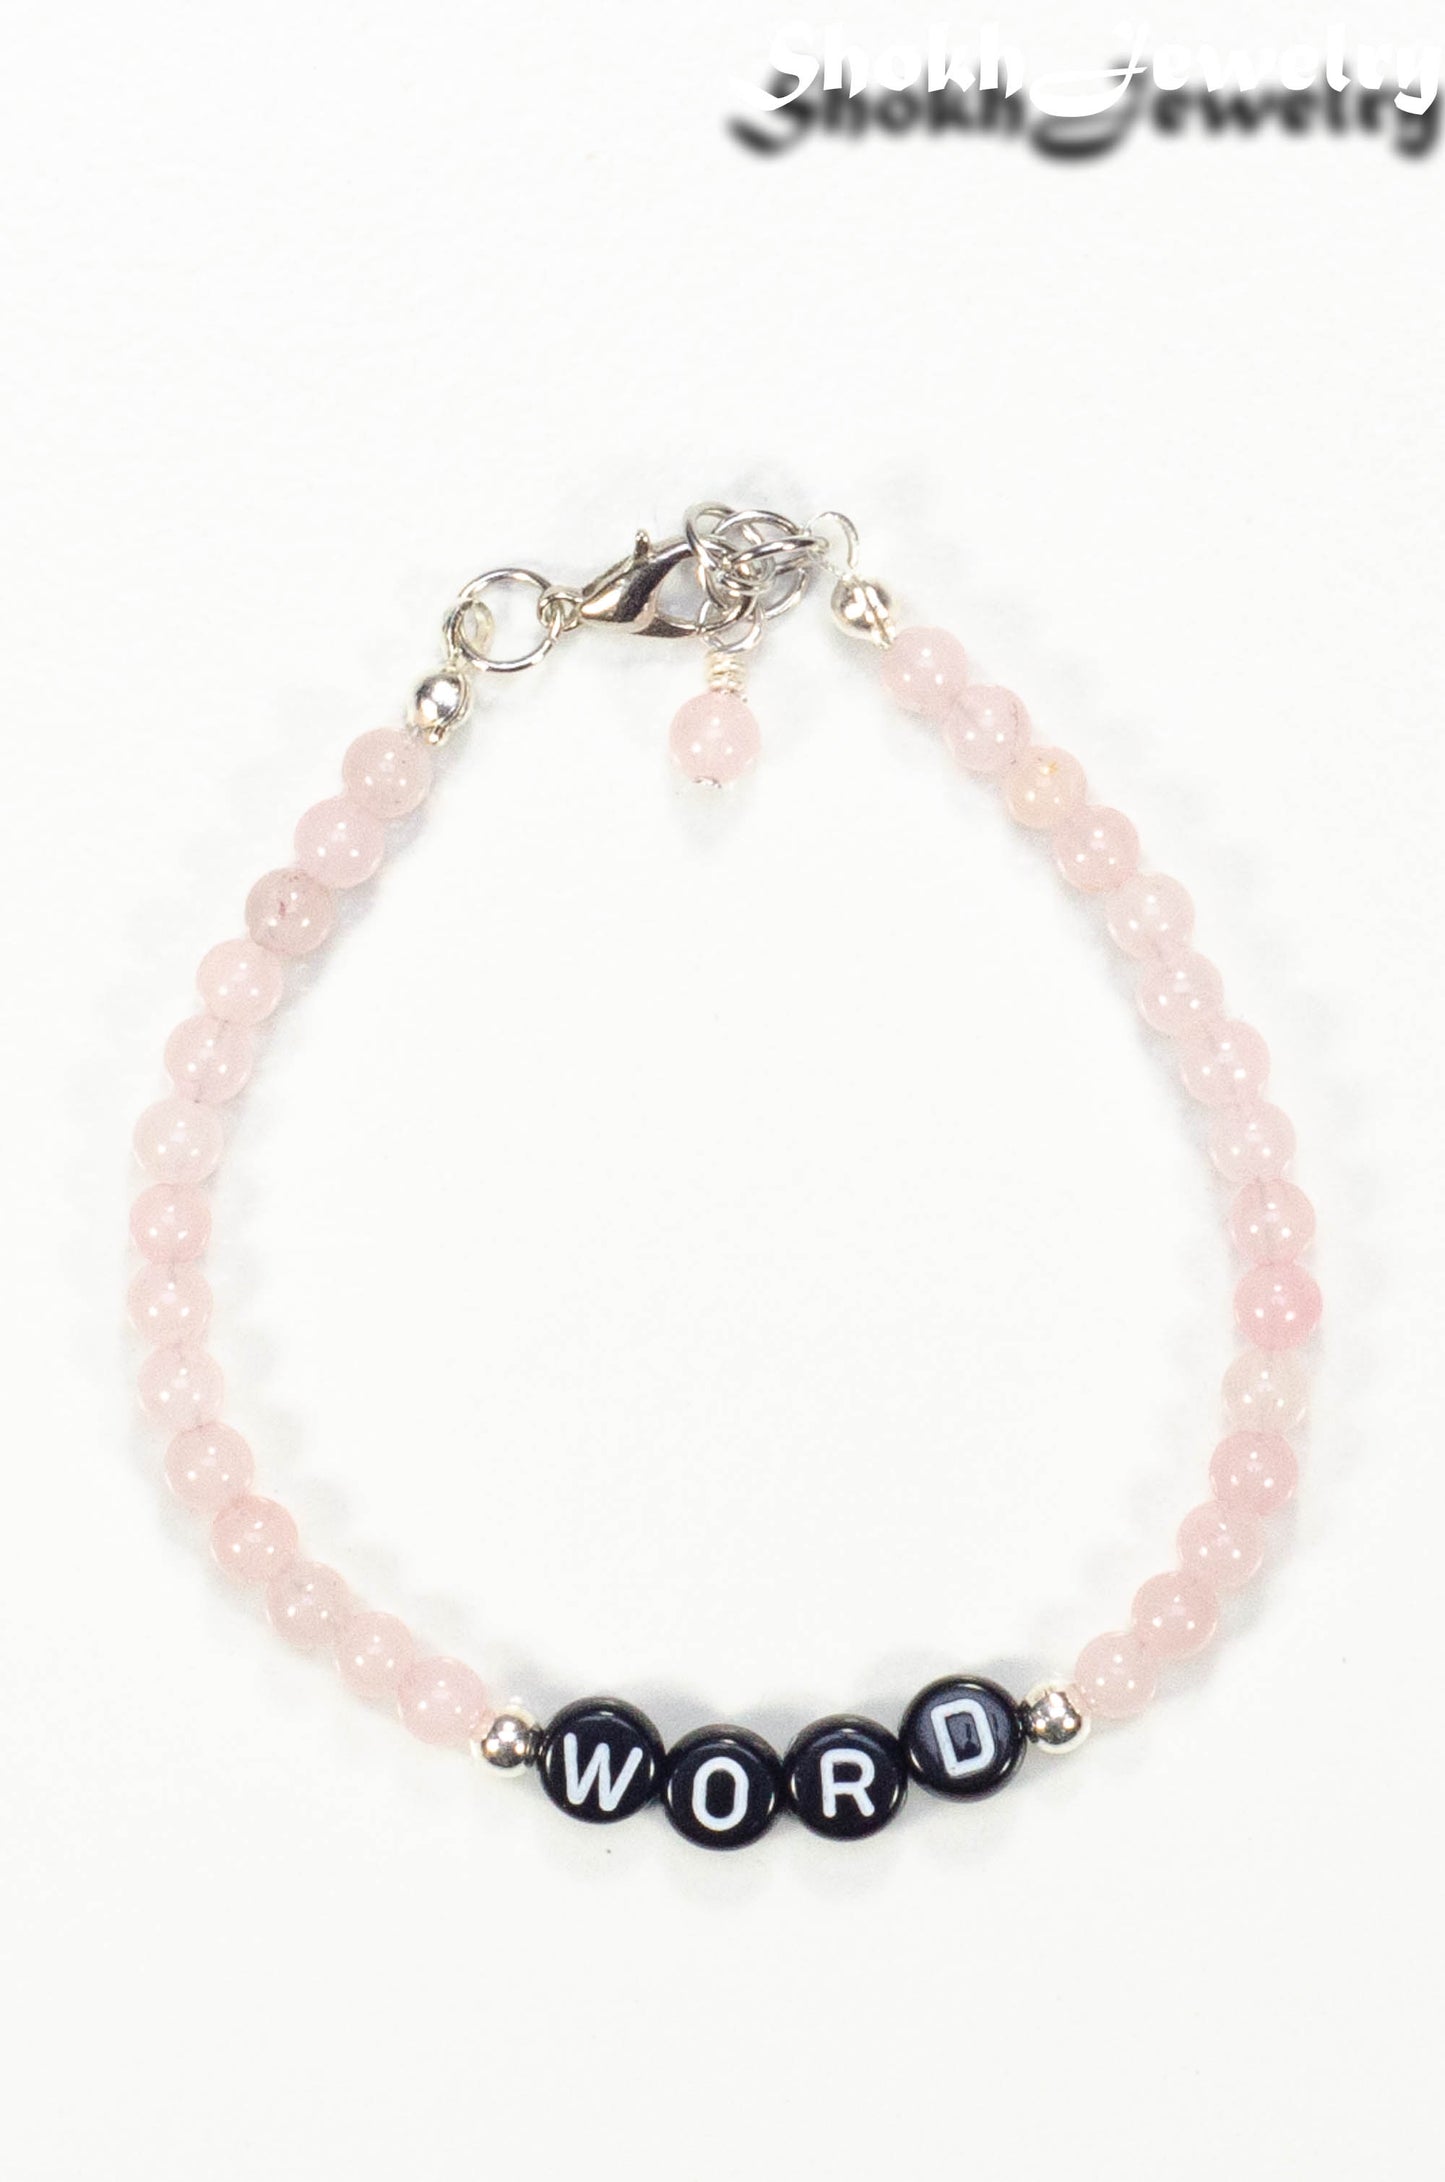 Top view of Personalized Rose Quartz Bracelet with Clasp.